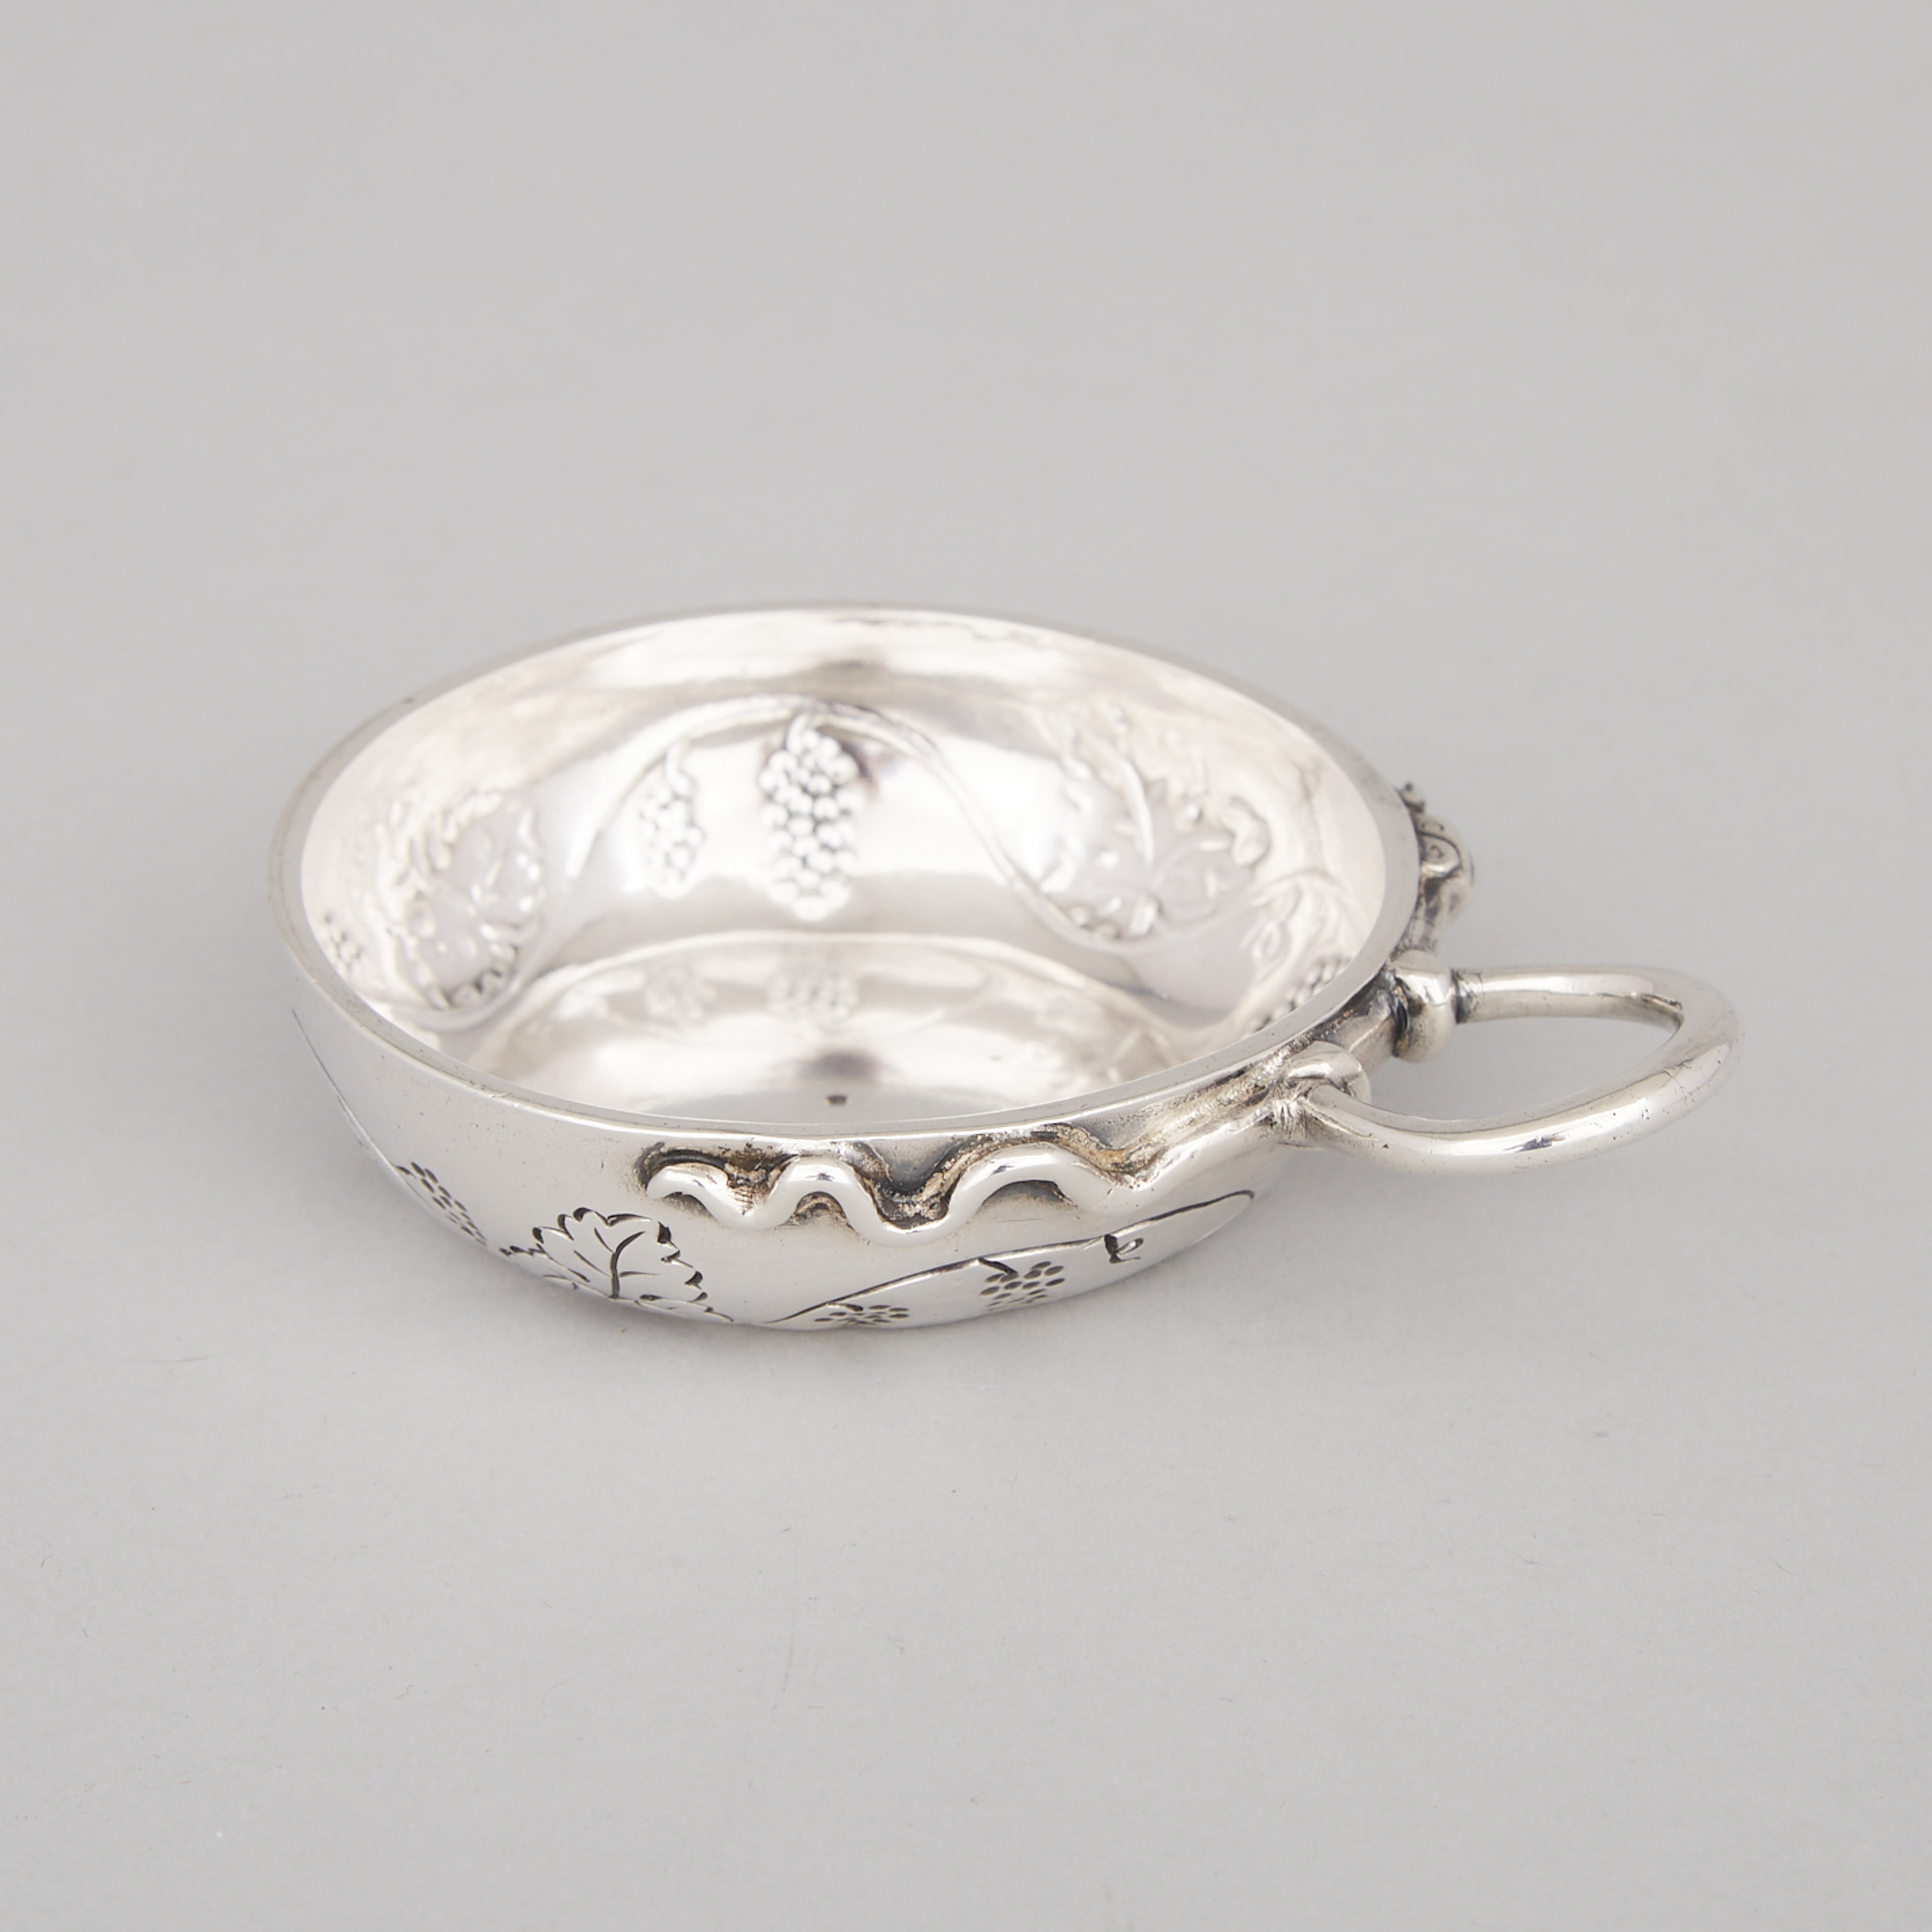 French Silver Wine Taster, late 18th century